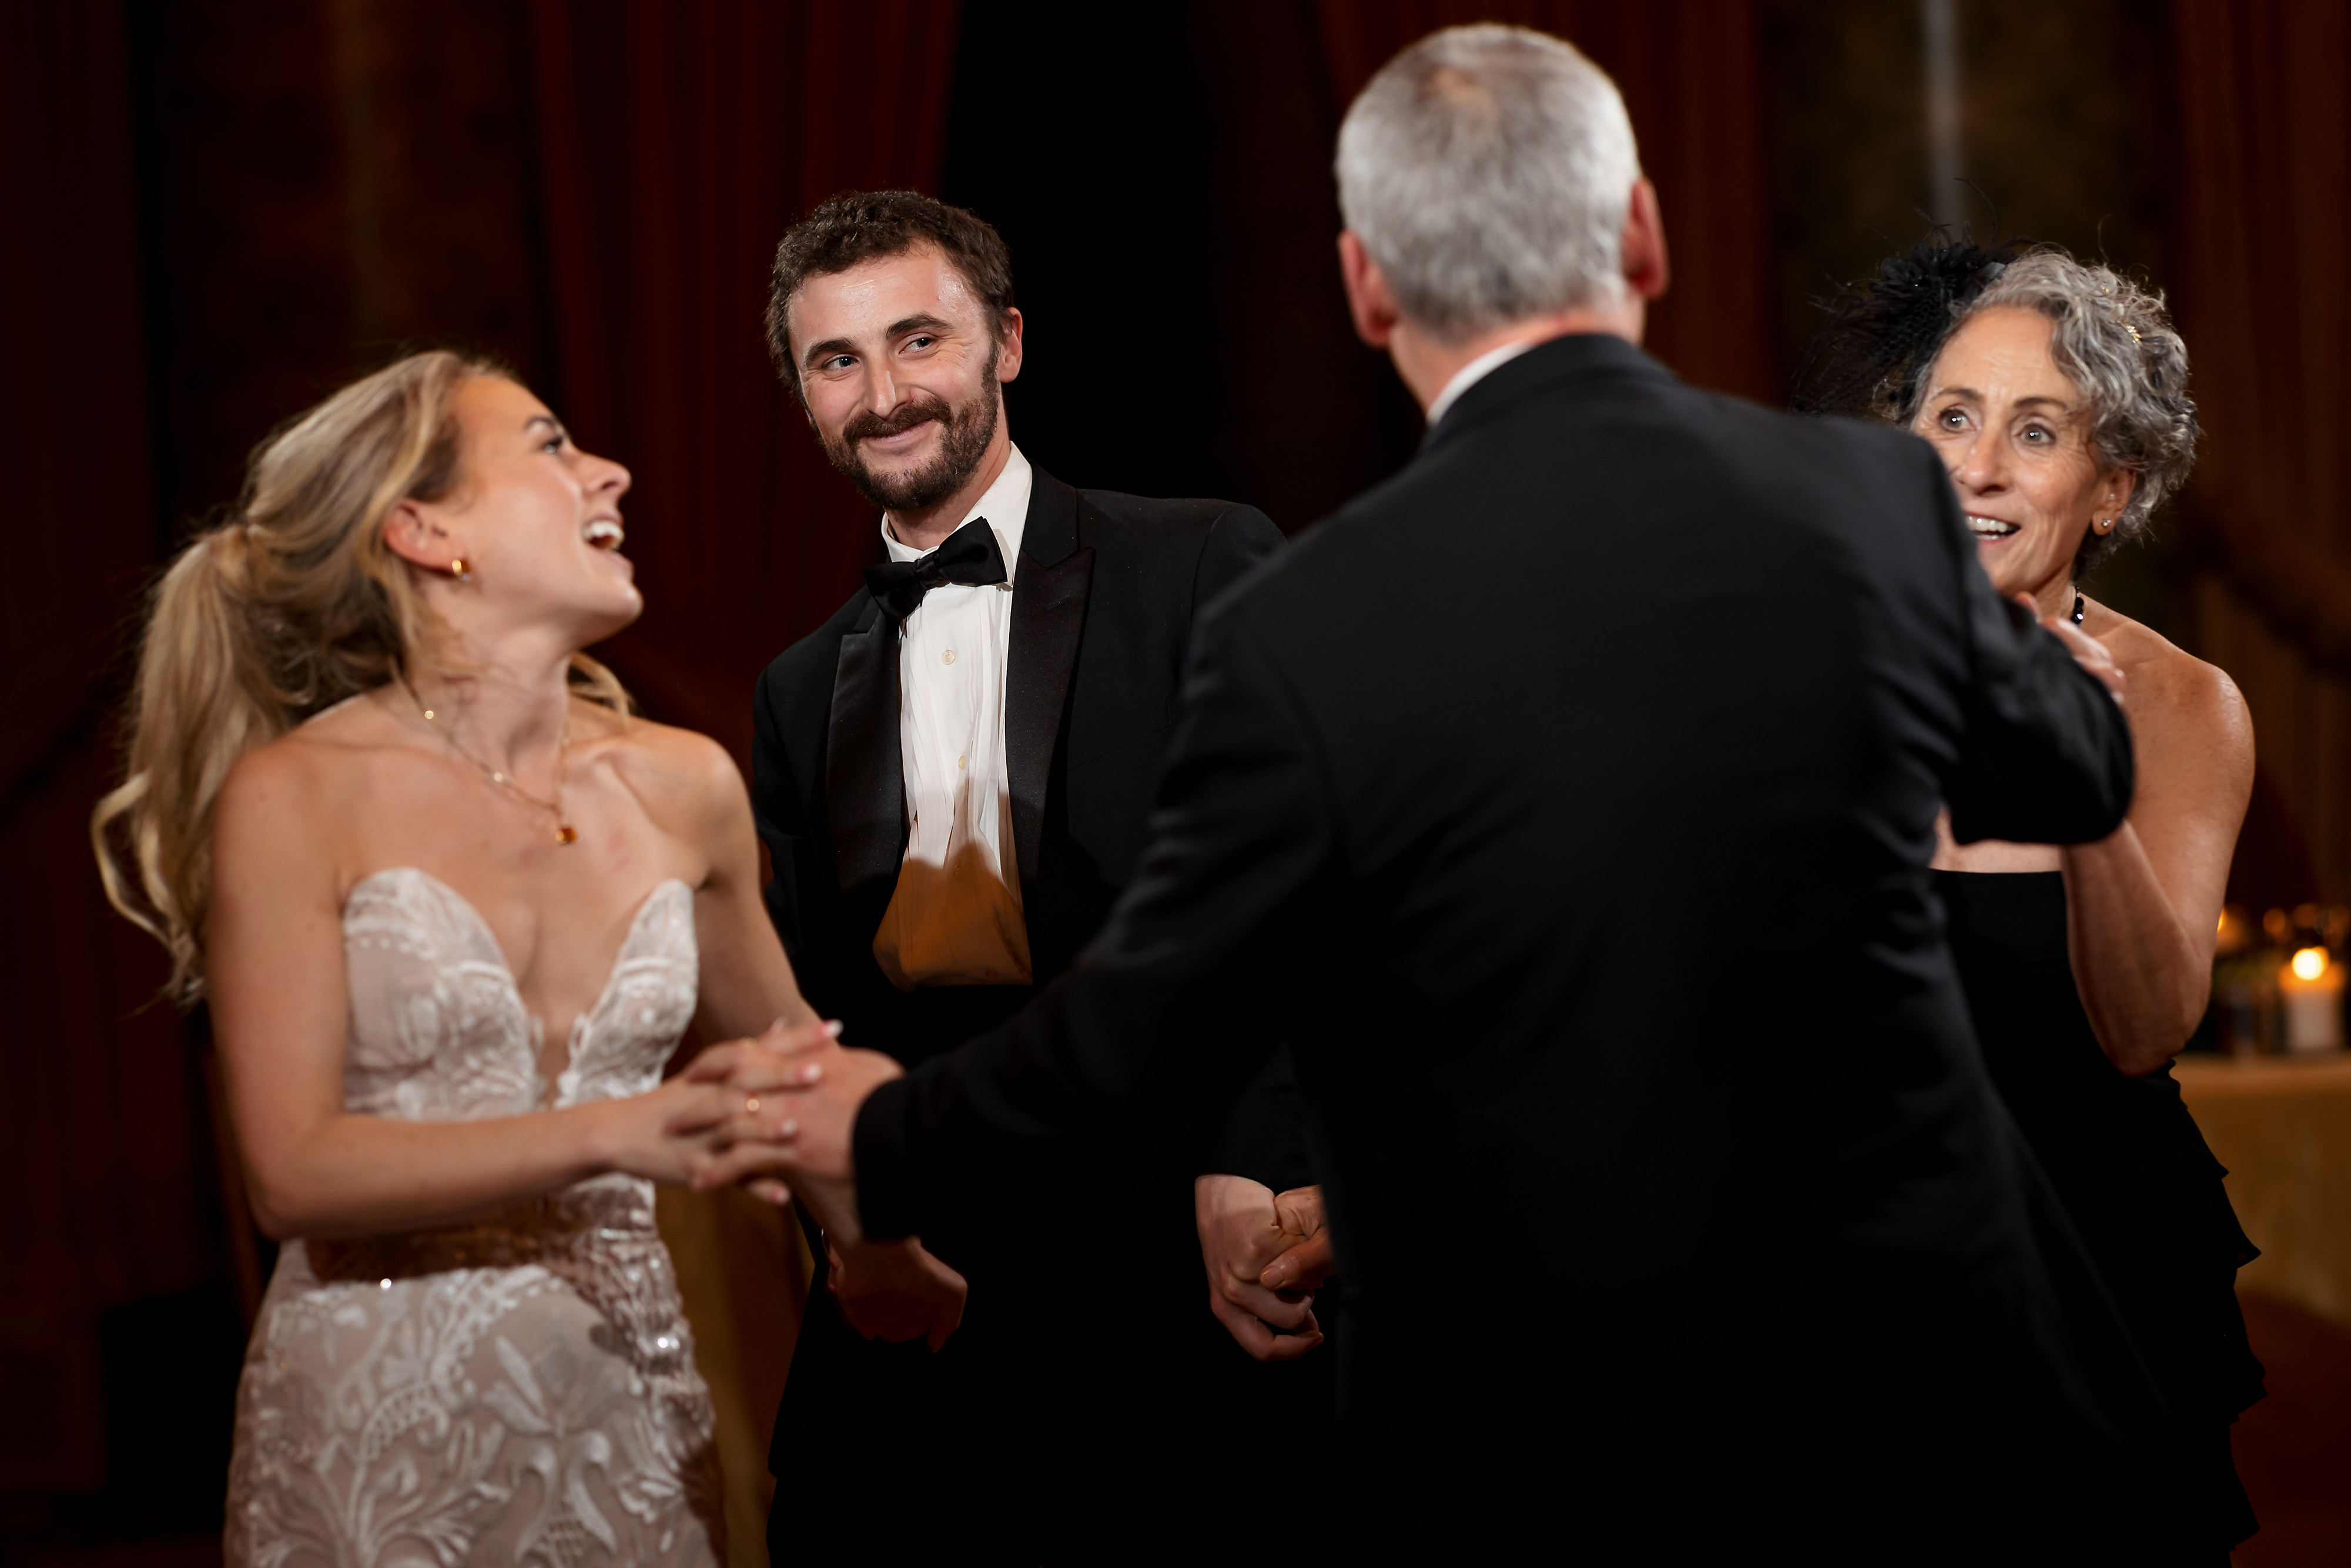 Brides family shares first dance during wedding reception in the Grand Ballroom at The Drake Hotel in Chicago